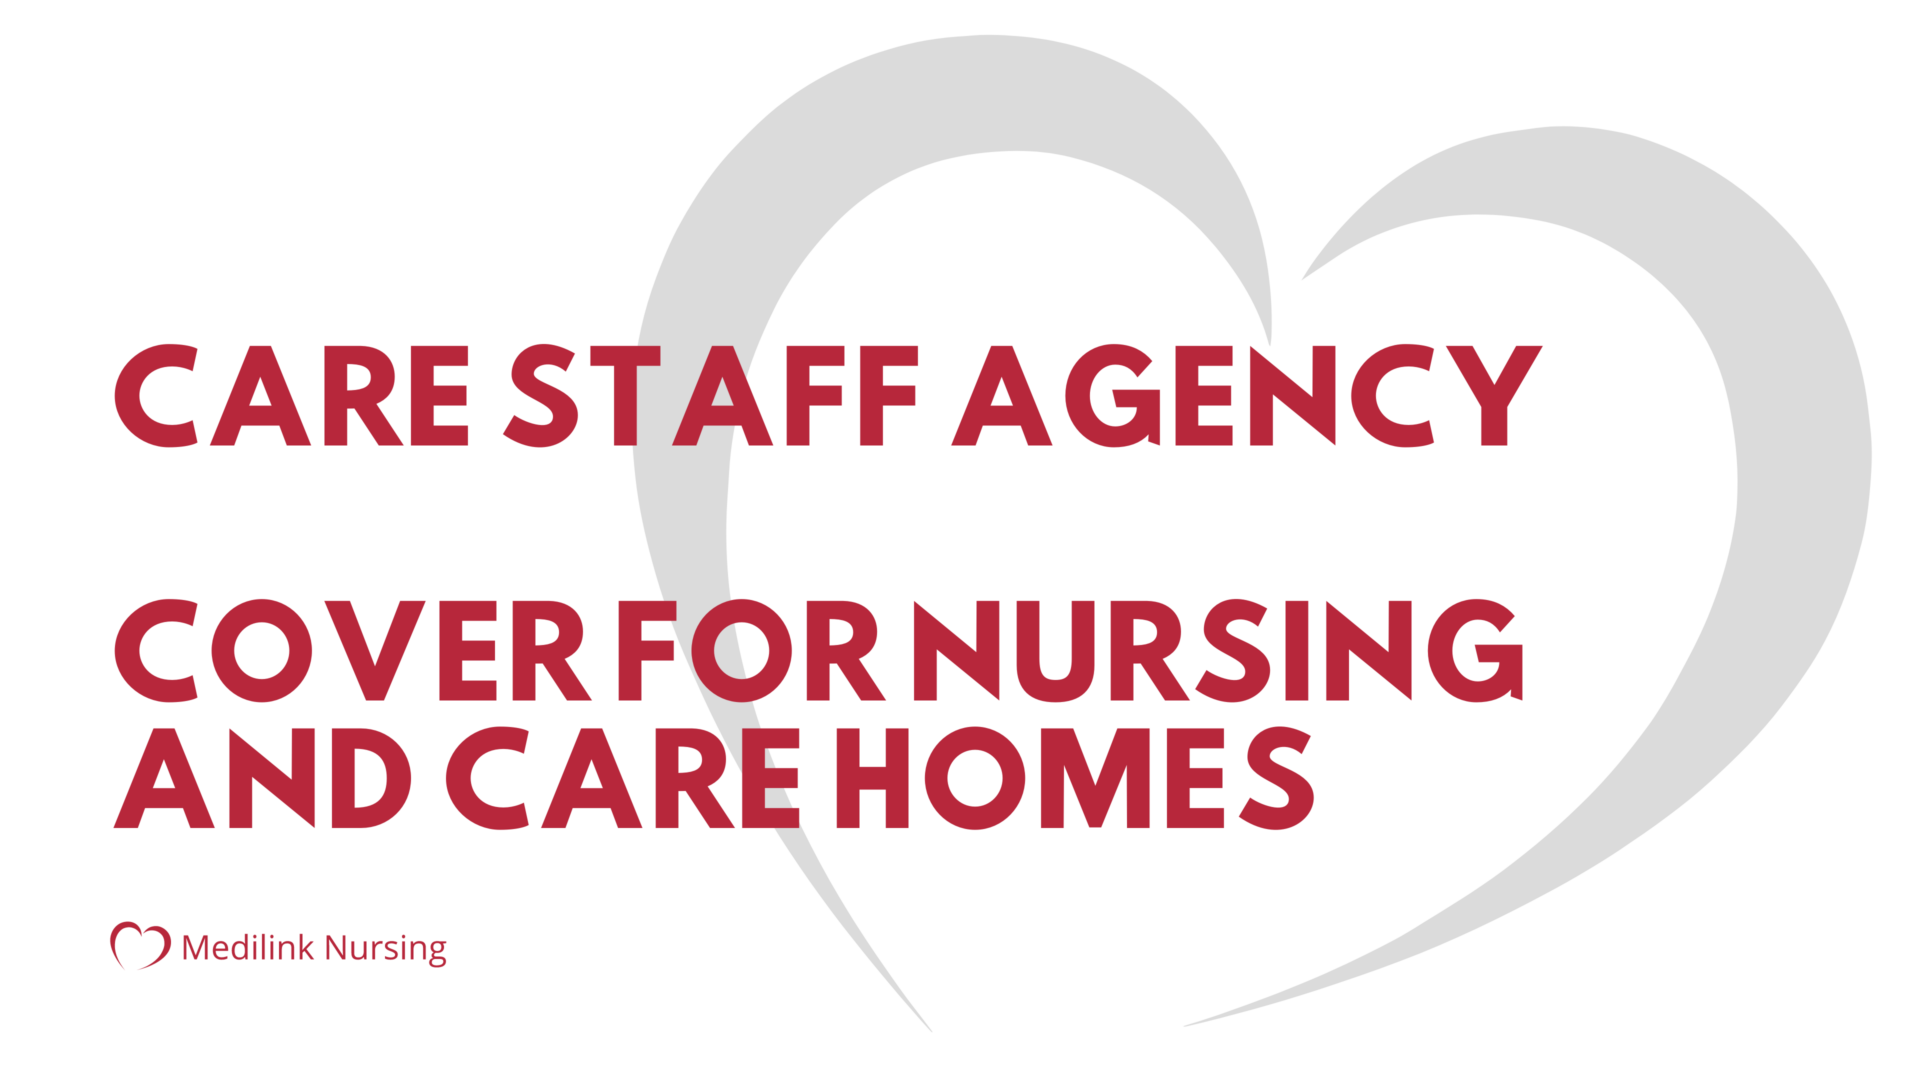 Care Staff Agency Nursing and Care Homes